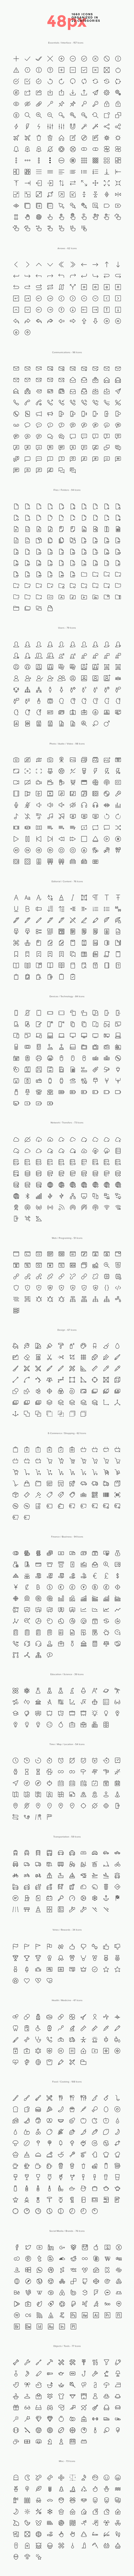 Simple Line Icons Pro in Simple Icons - product preview 3